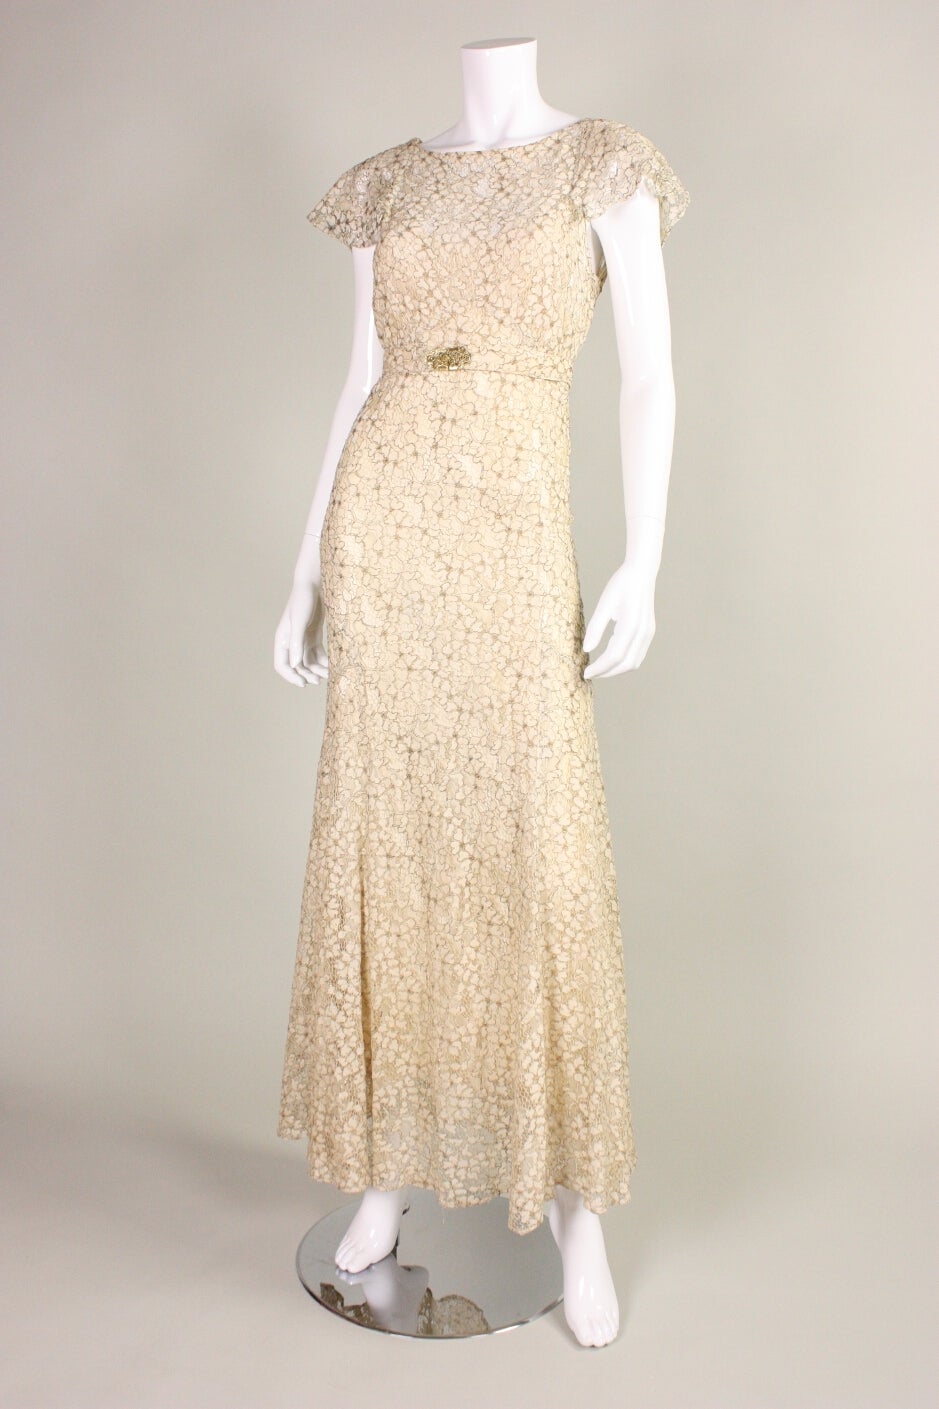 Vintage gown dates to the 1930's and is made of metallic lamé ivory lace in a floral pattern.  It is cut on the bias for that timeless 1930's silhouette.  Flounce sleeves.  V-neck back.  Side snap closures.  Unlined, but comes with an ivory silk